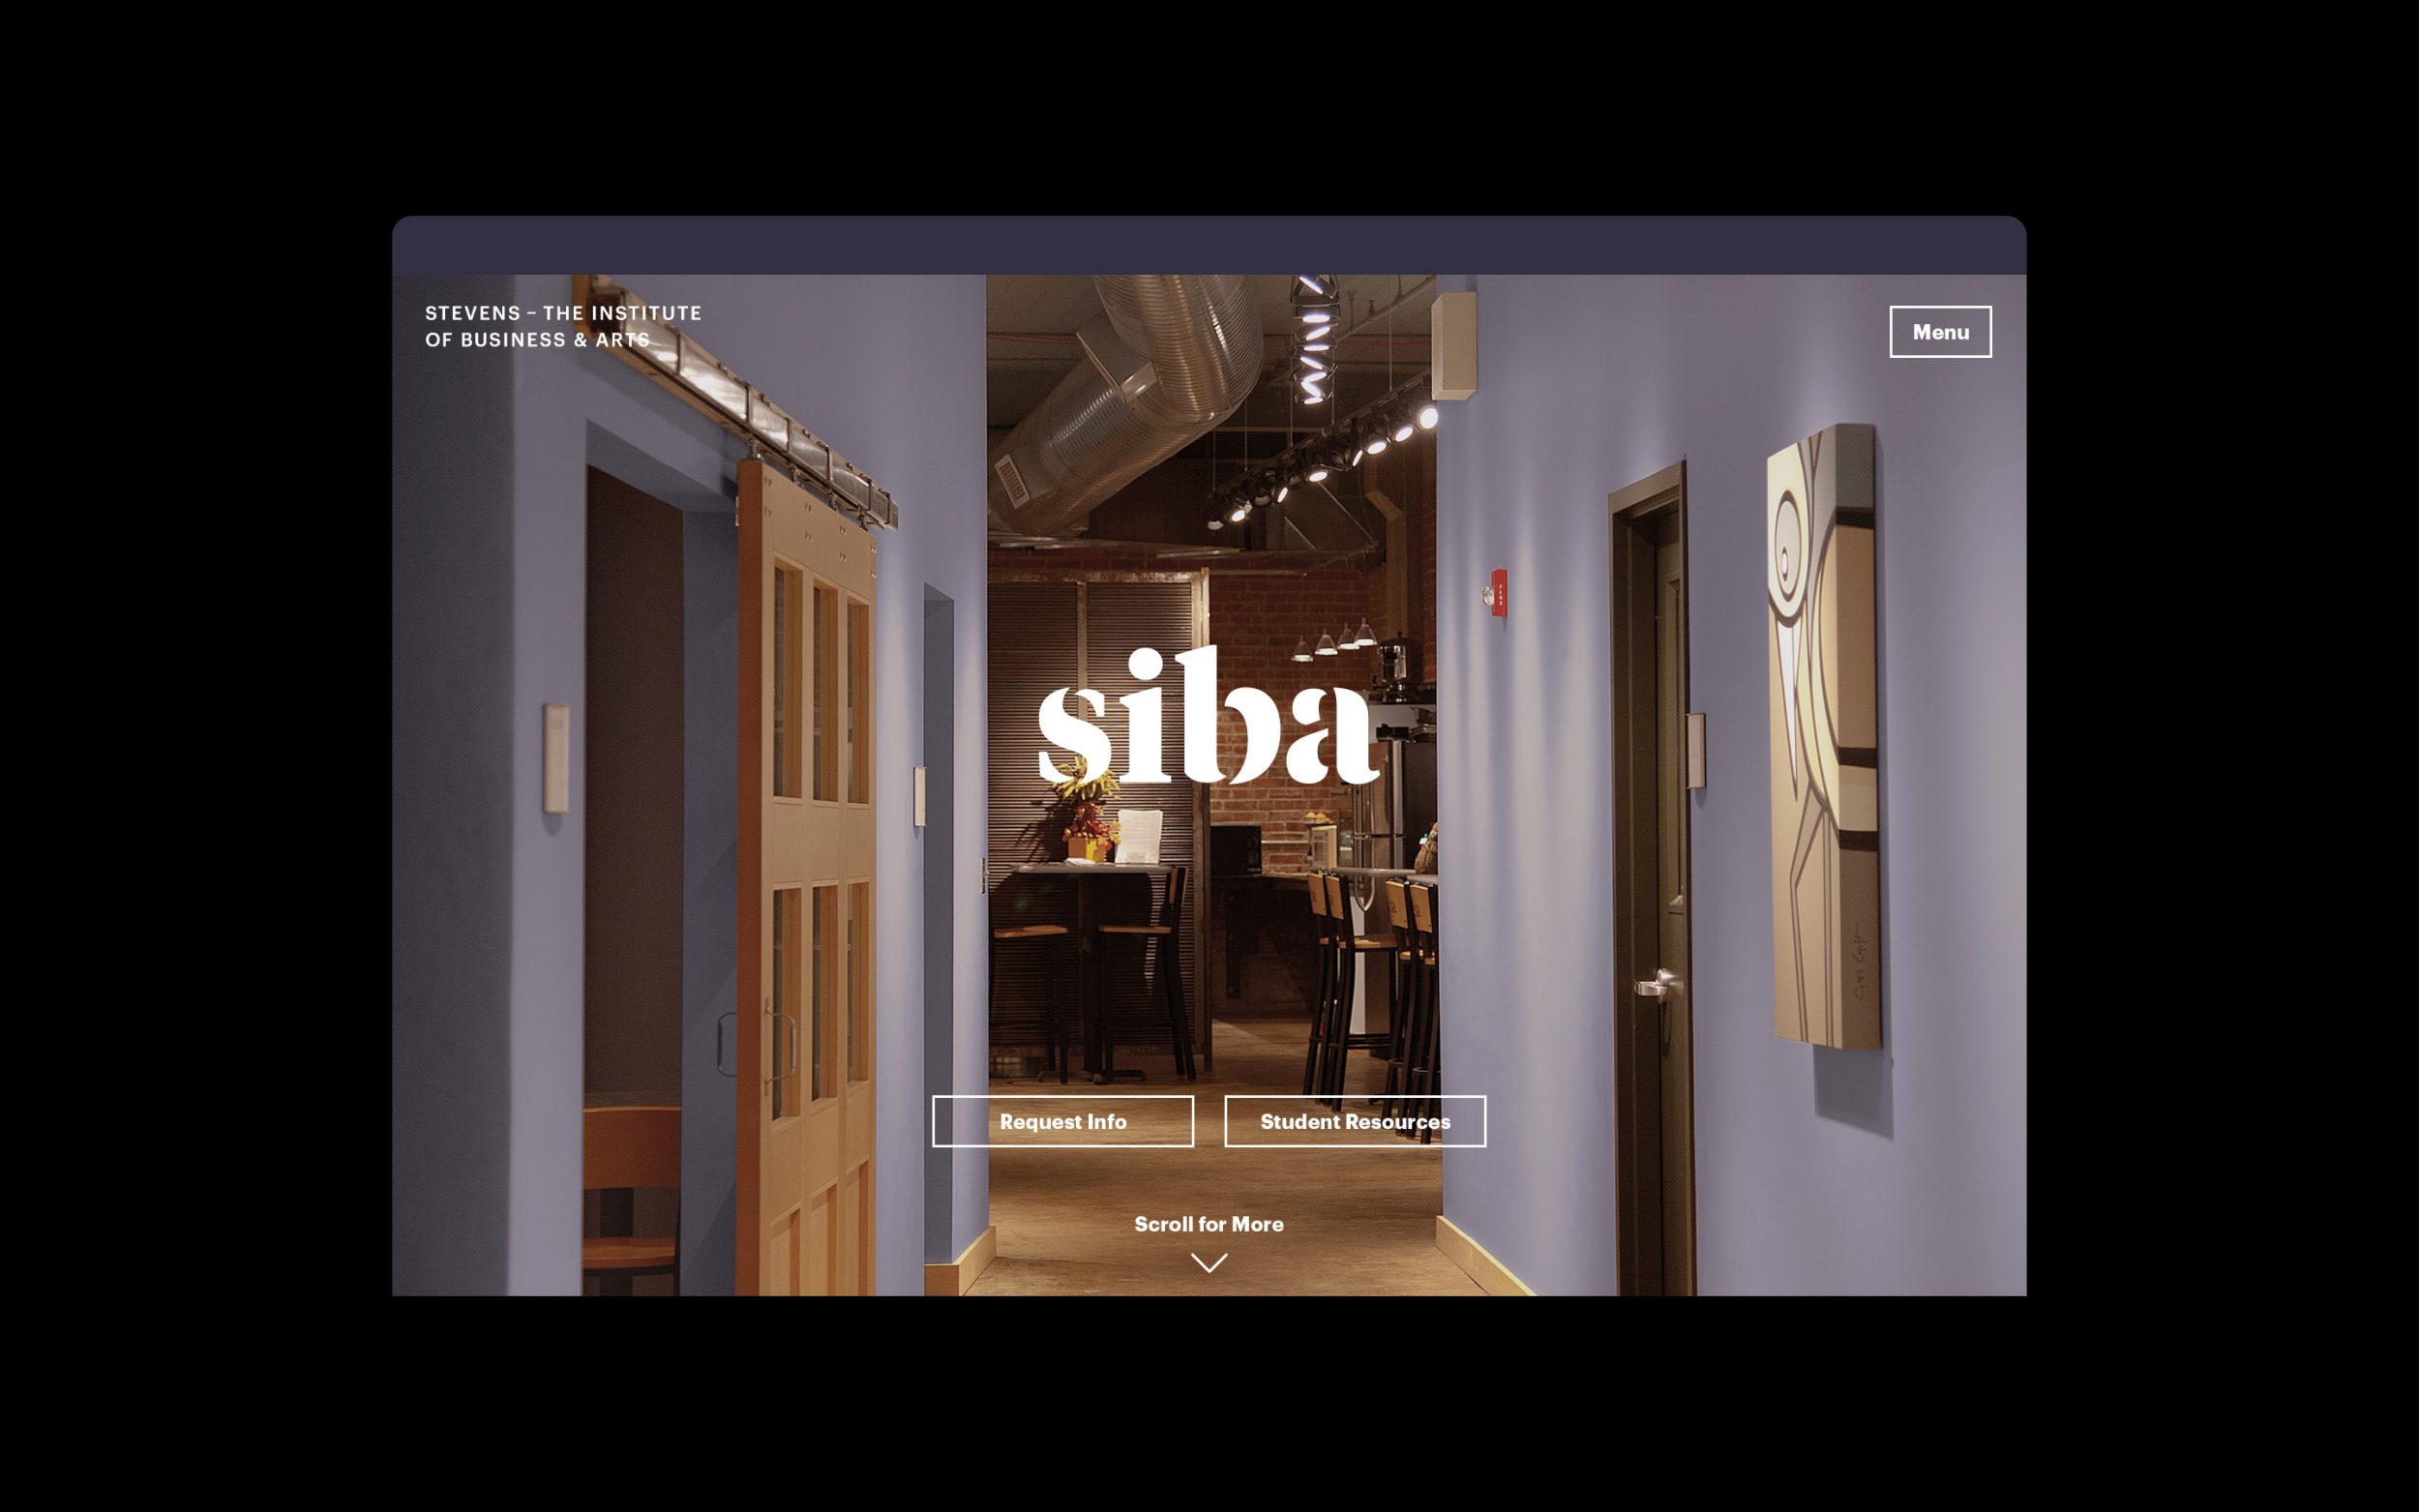 Web design, home page; Stevens Institute of Business and Arts.